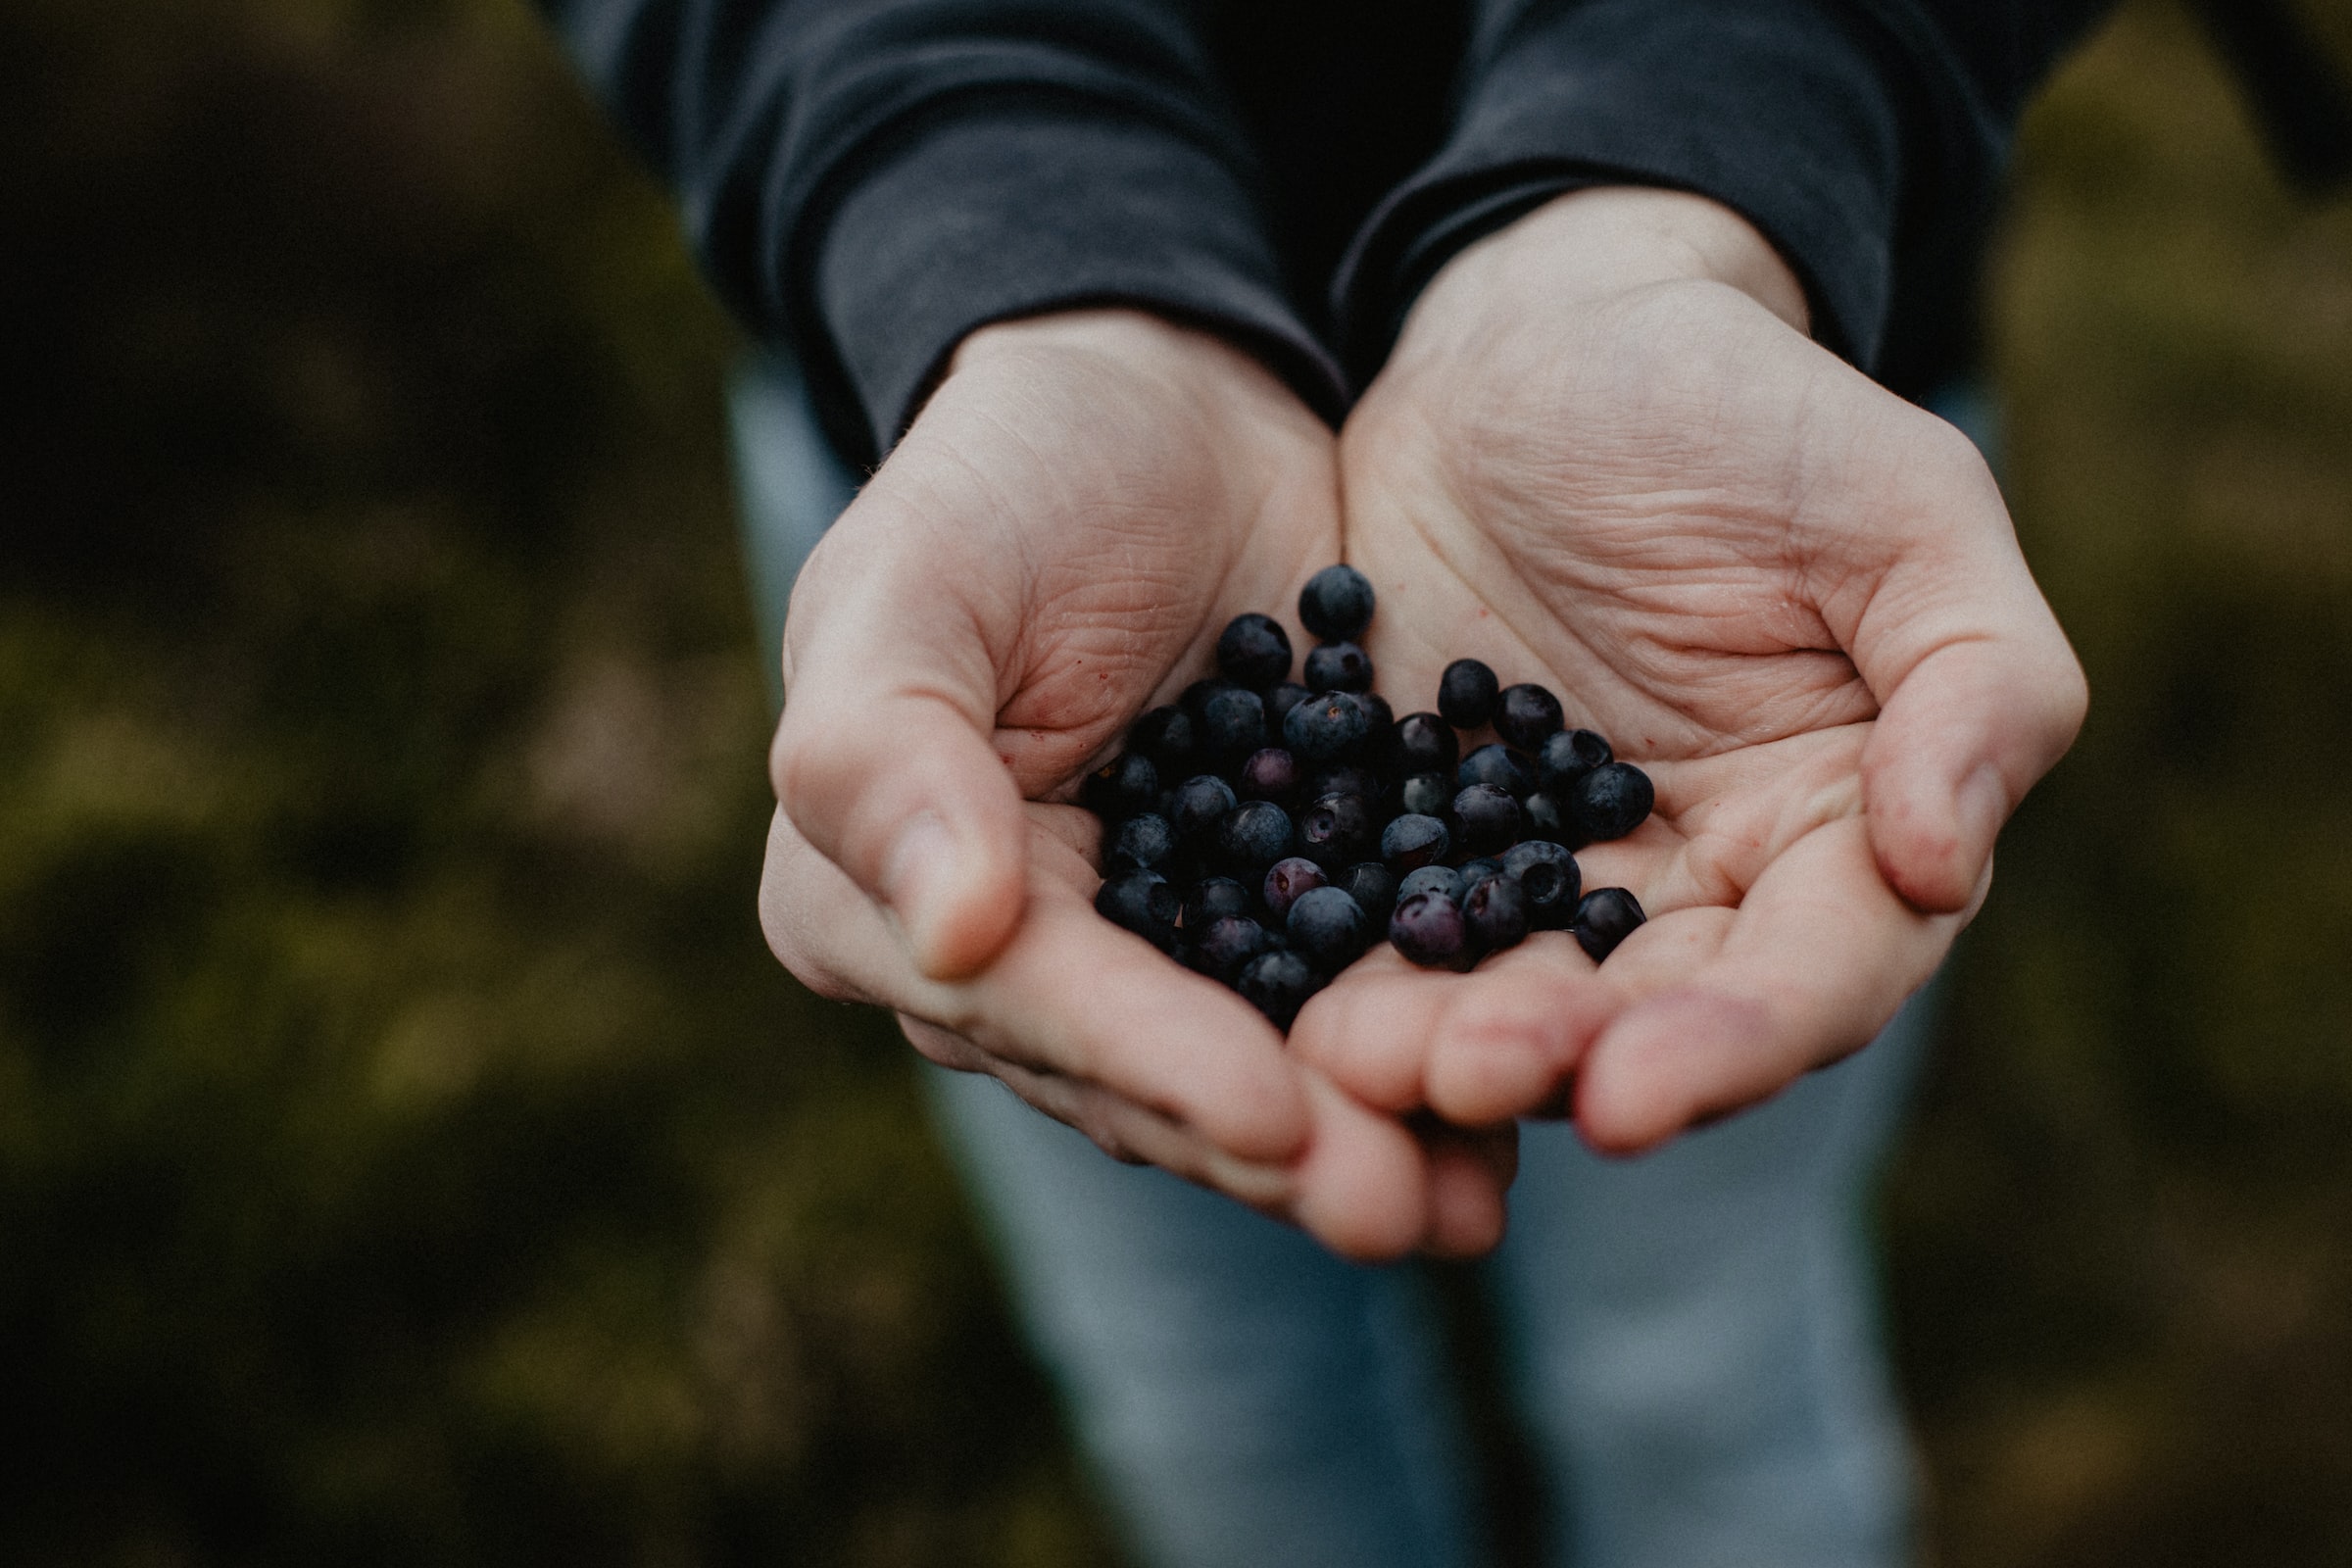 Cupped hands holding berries